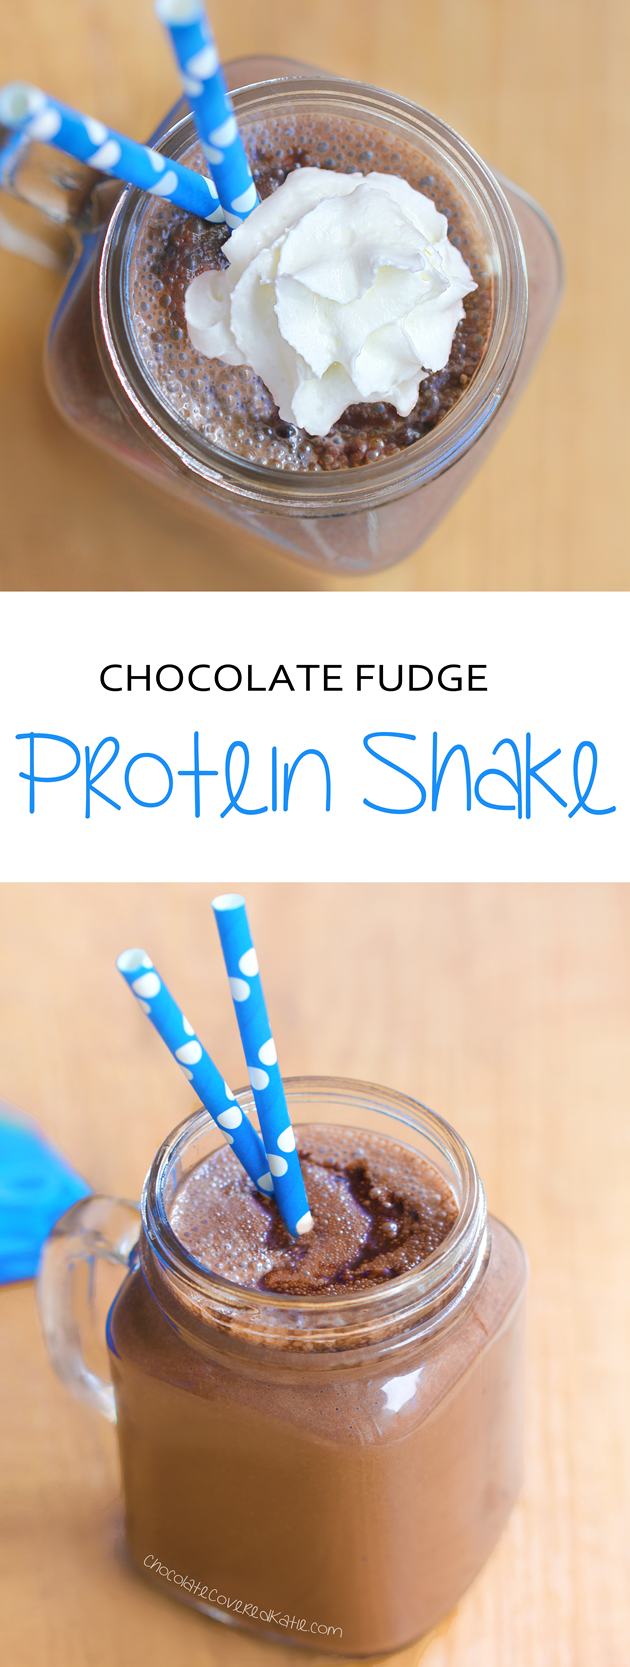 Chocolate Protein Shake - can be soy-free / dairy-free / no sugar added: https://chocolatecoveredkatie.com/2015/04/20/chocolate-fudge-protein-shake/